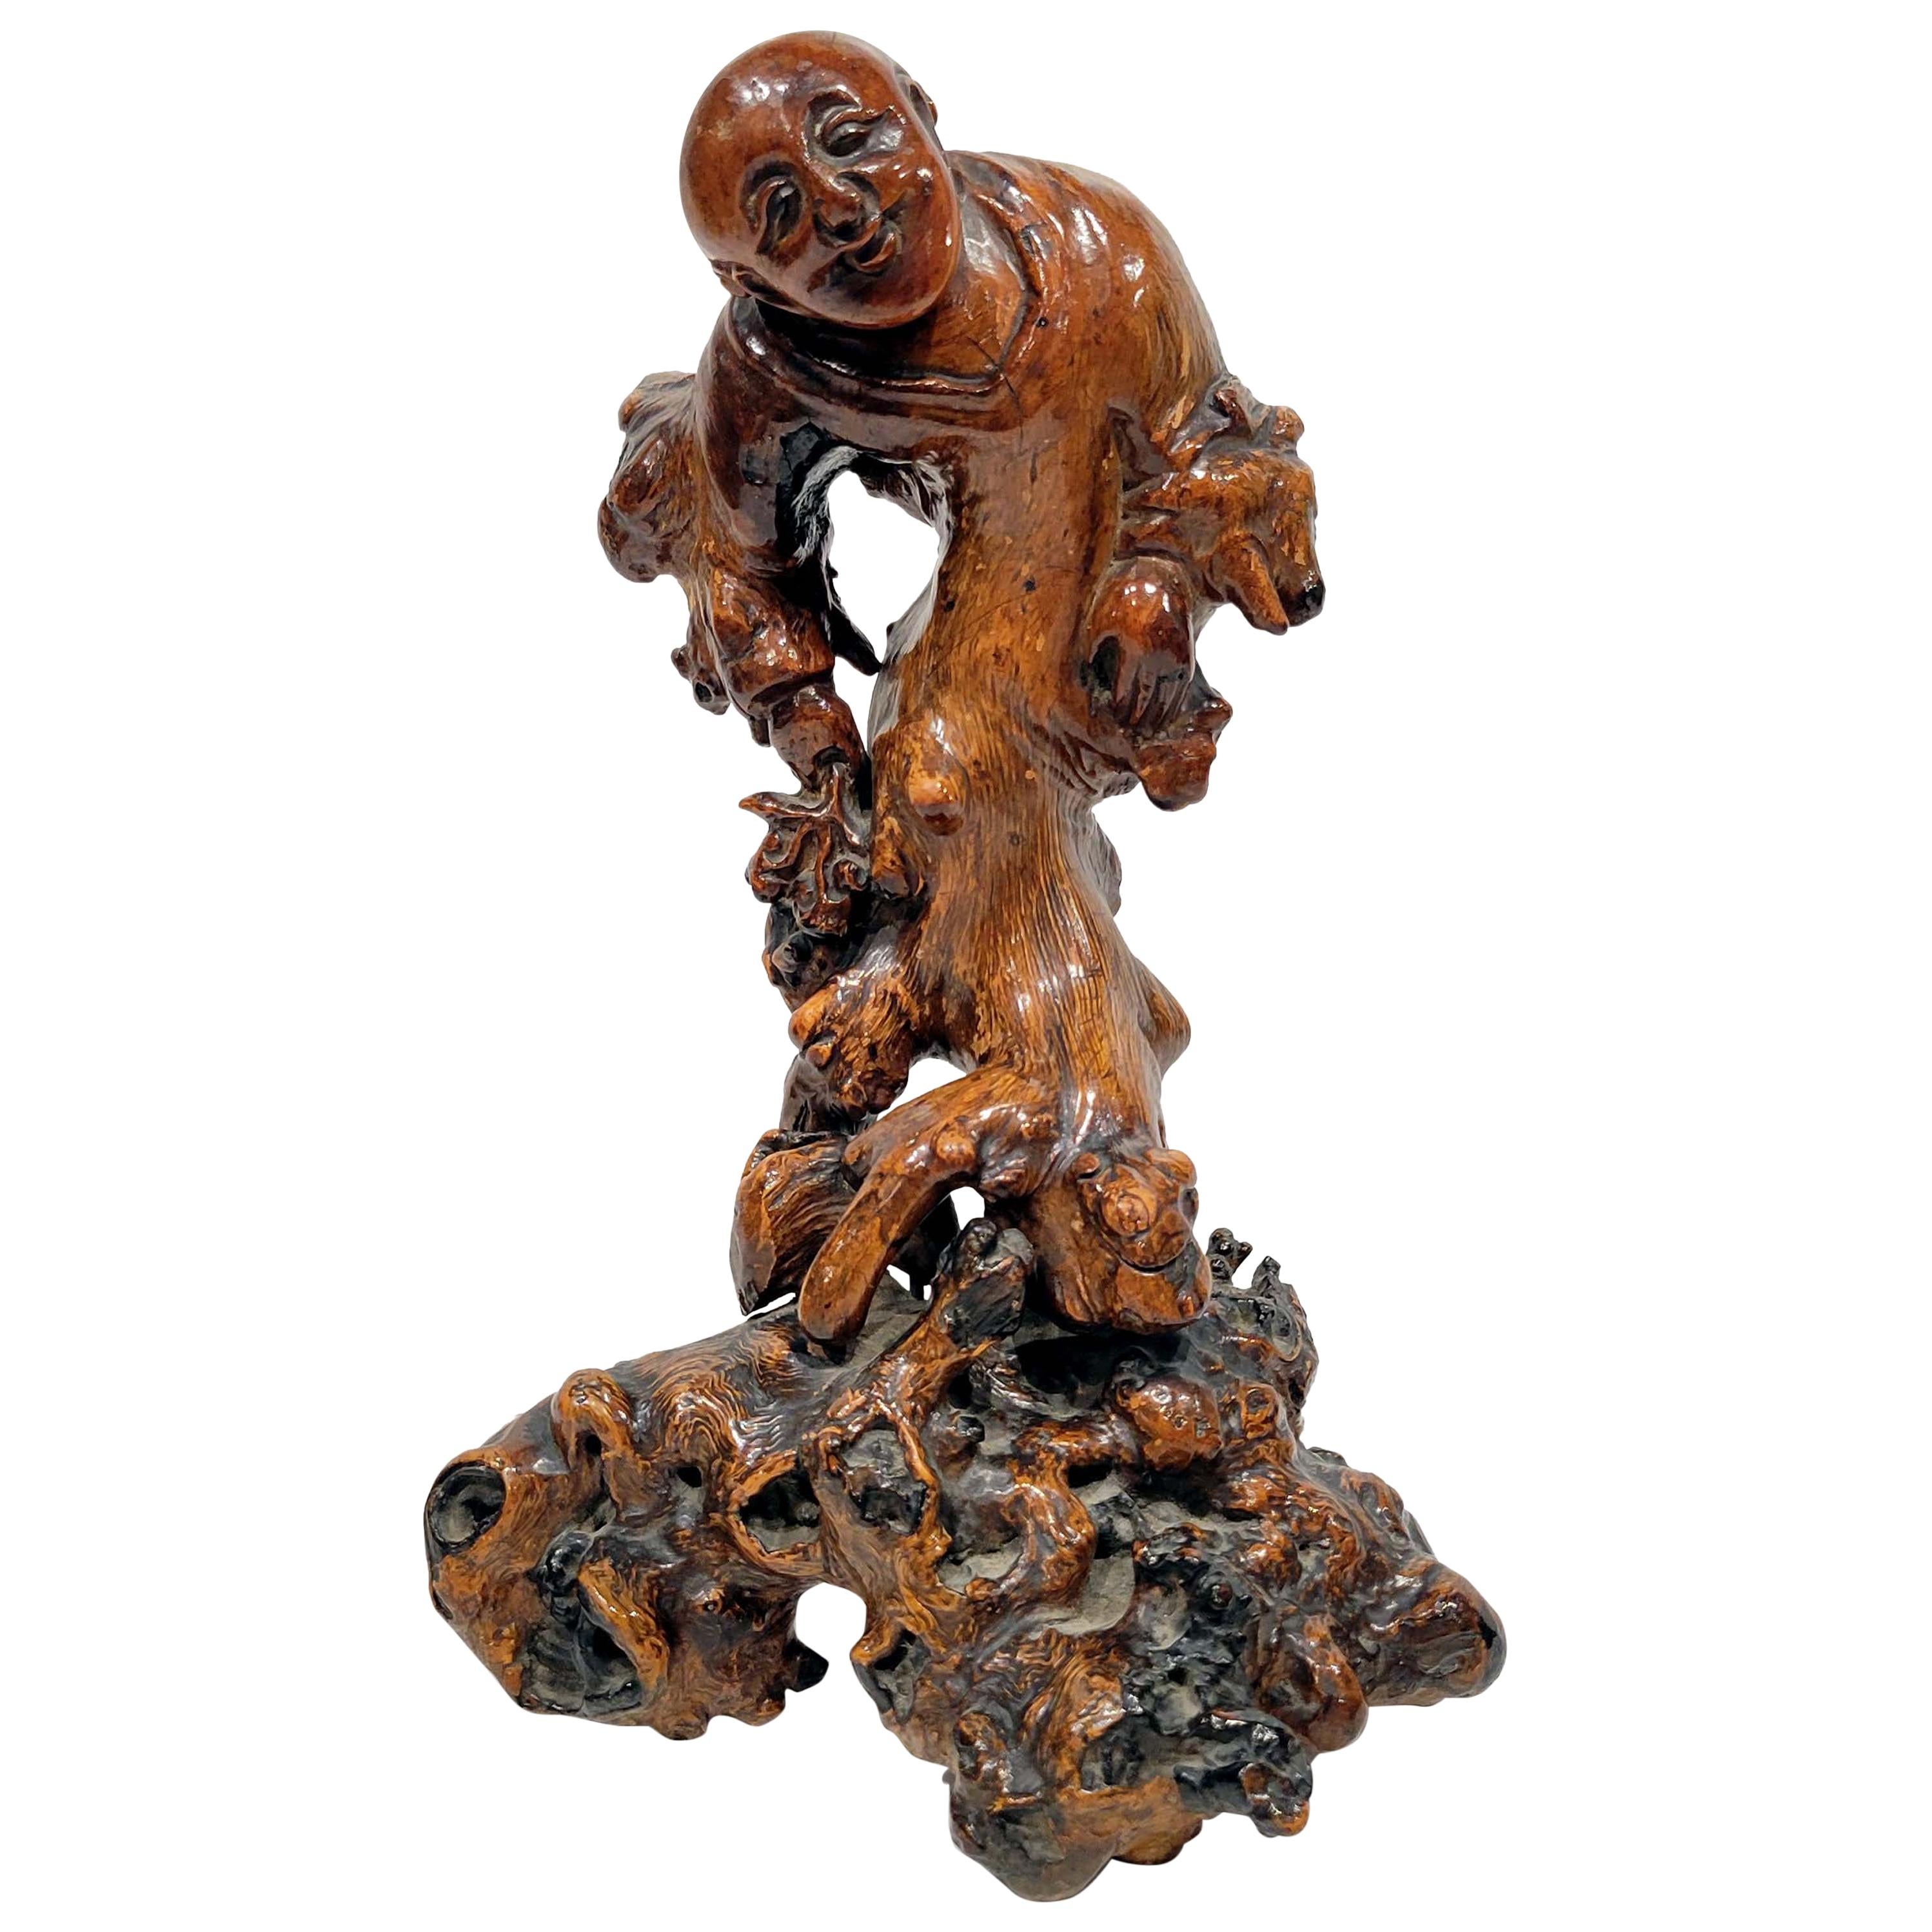 Chinese Carved Root Wood Figure, 18th-19th Century